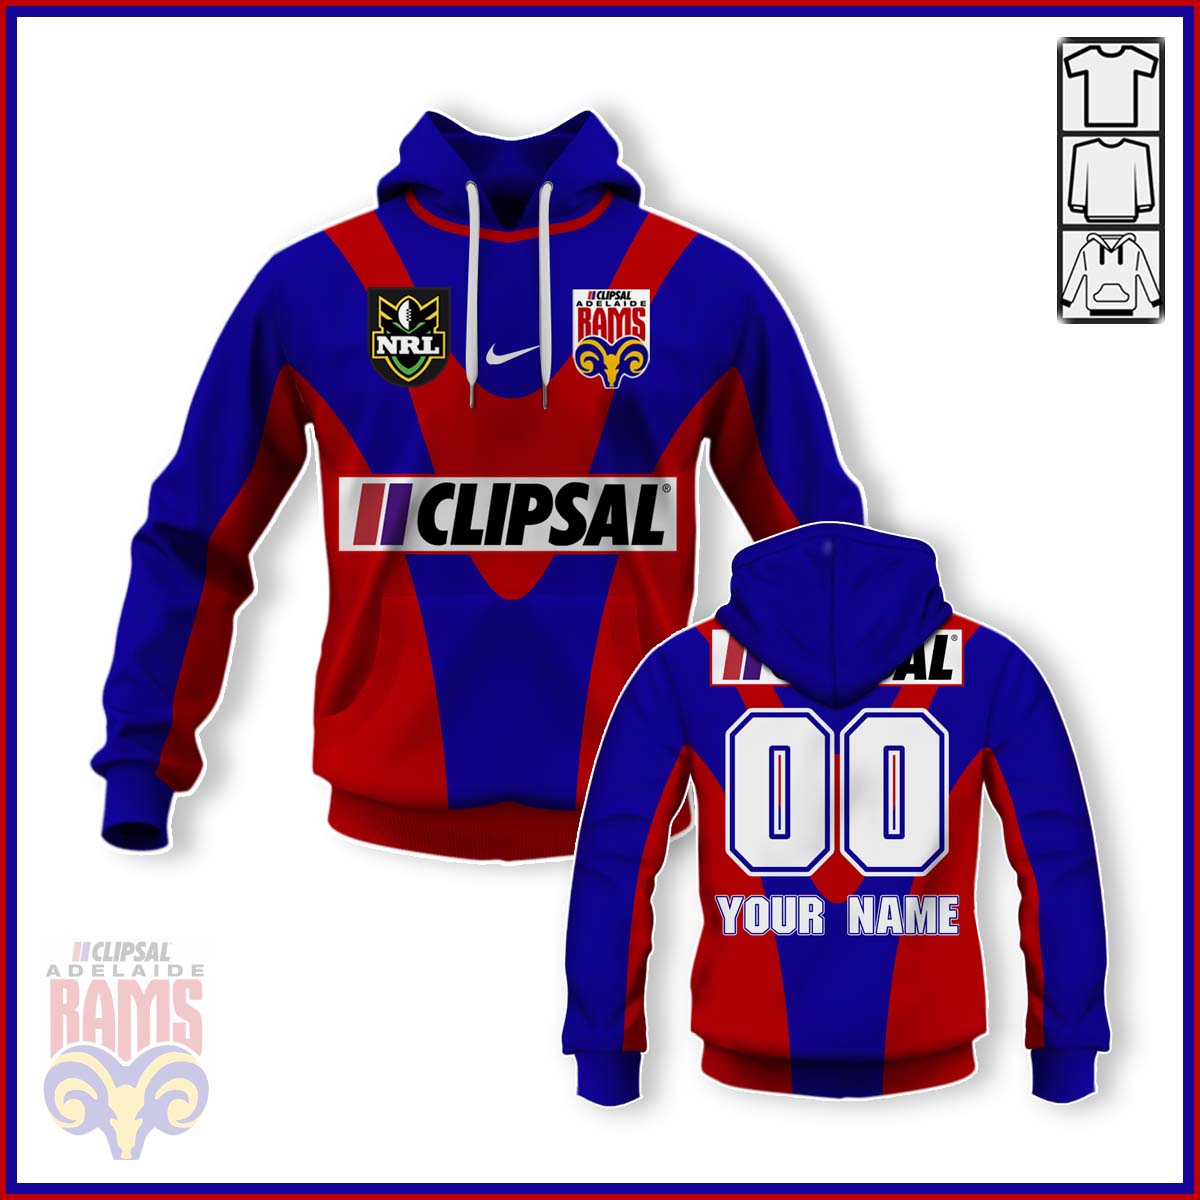 Personalized Adelaide Rams 1998 Vintage NRL Jersey Hoodies Shirts For Men Women